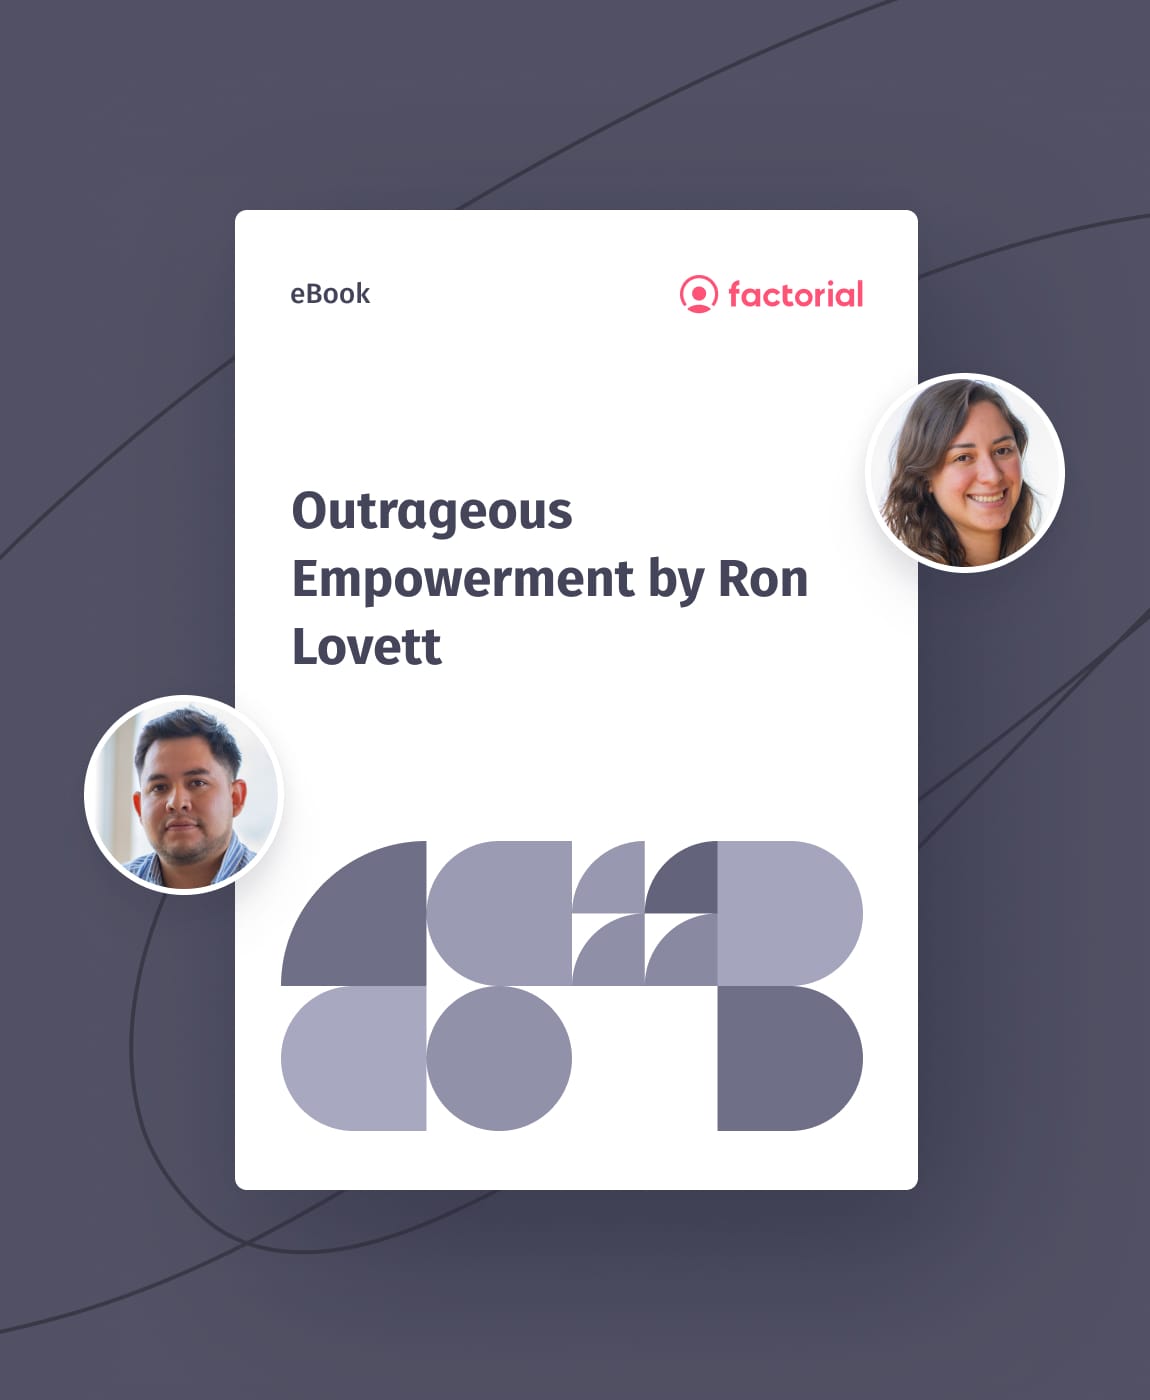 Outrageous Empowerment by Ron Lovett